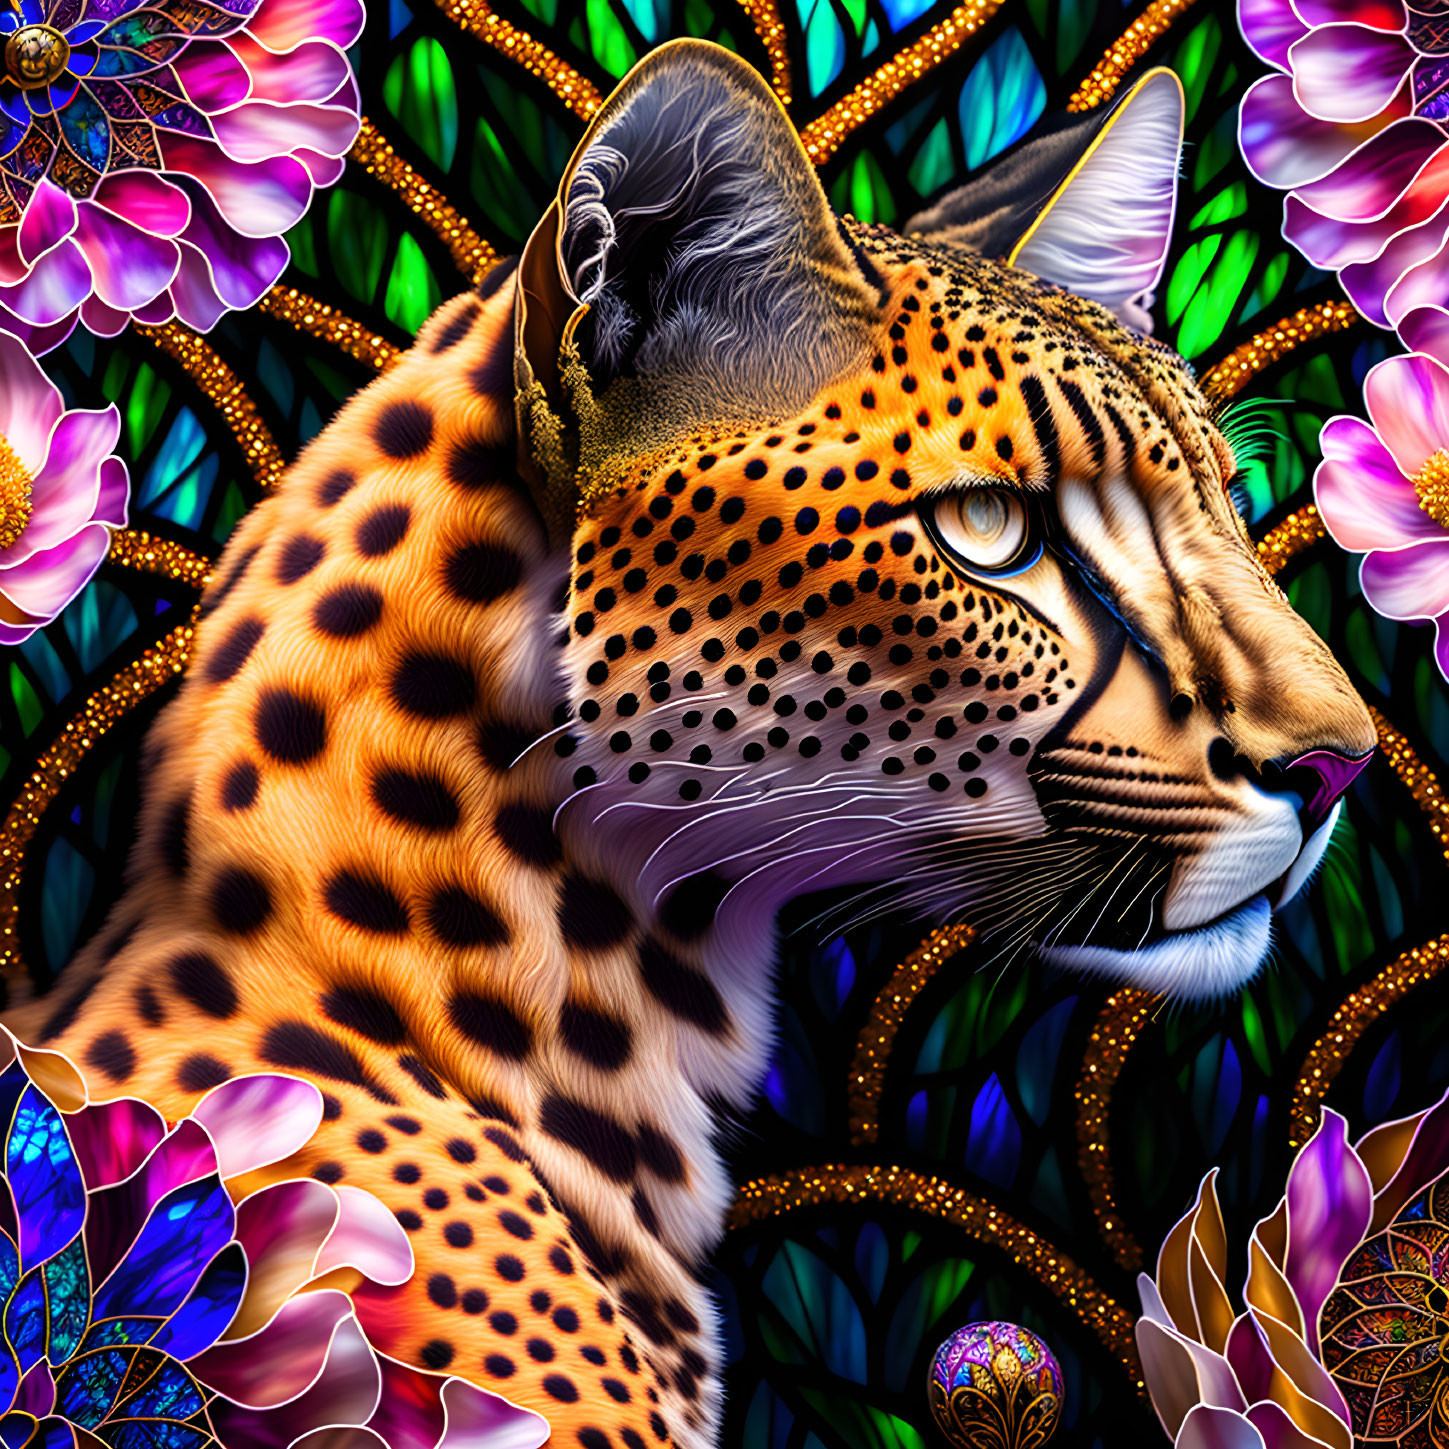 Leopard illustration with colorful stained glass-style background